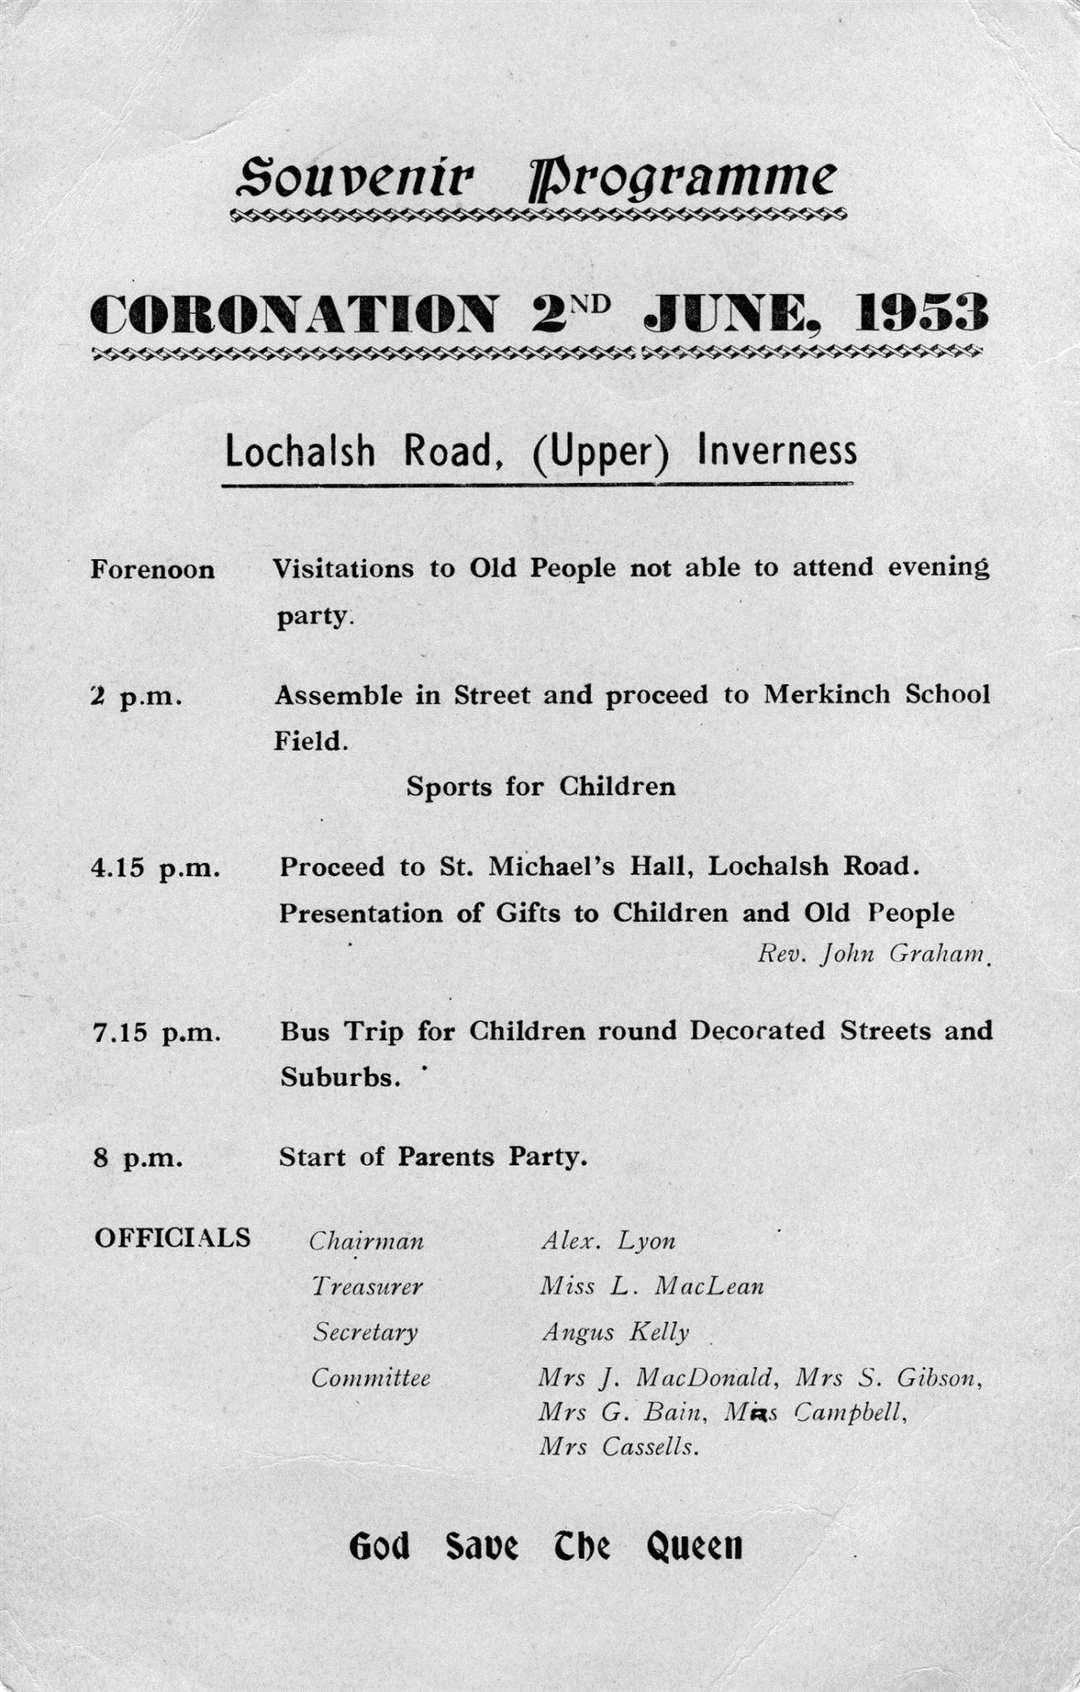 An Inverness street party programme cover from 1953